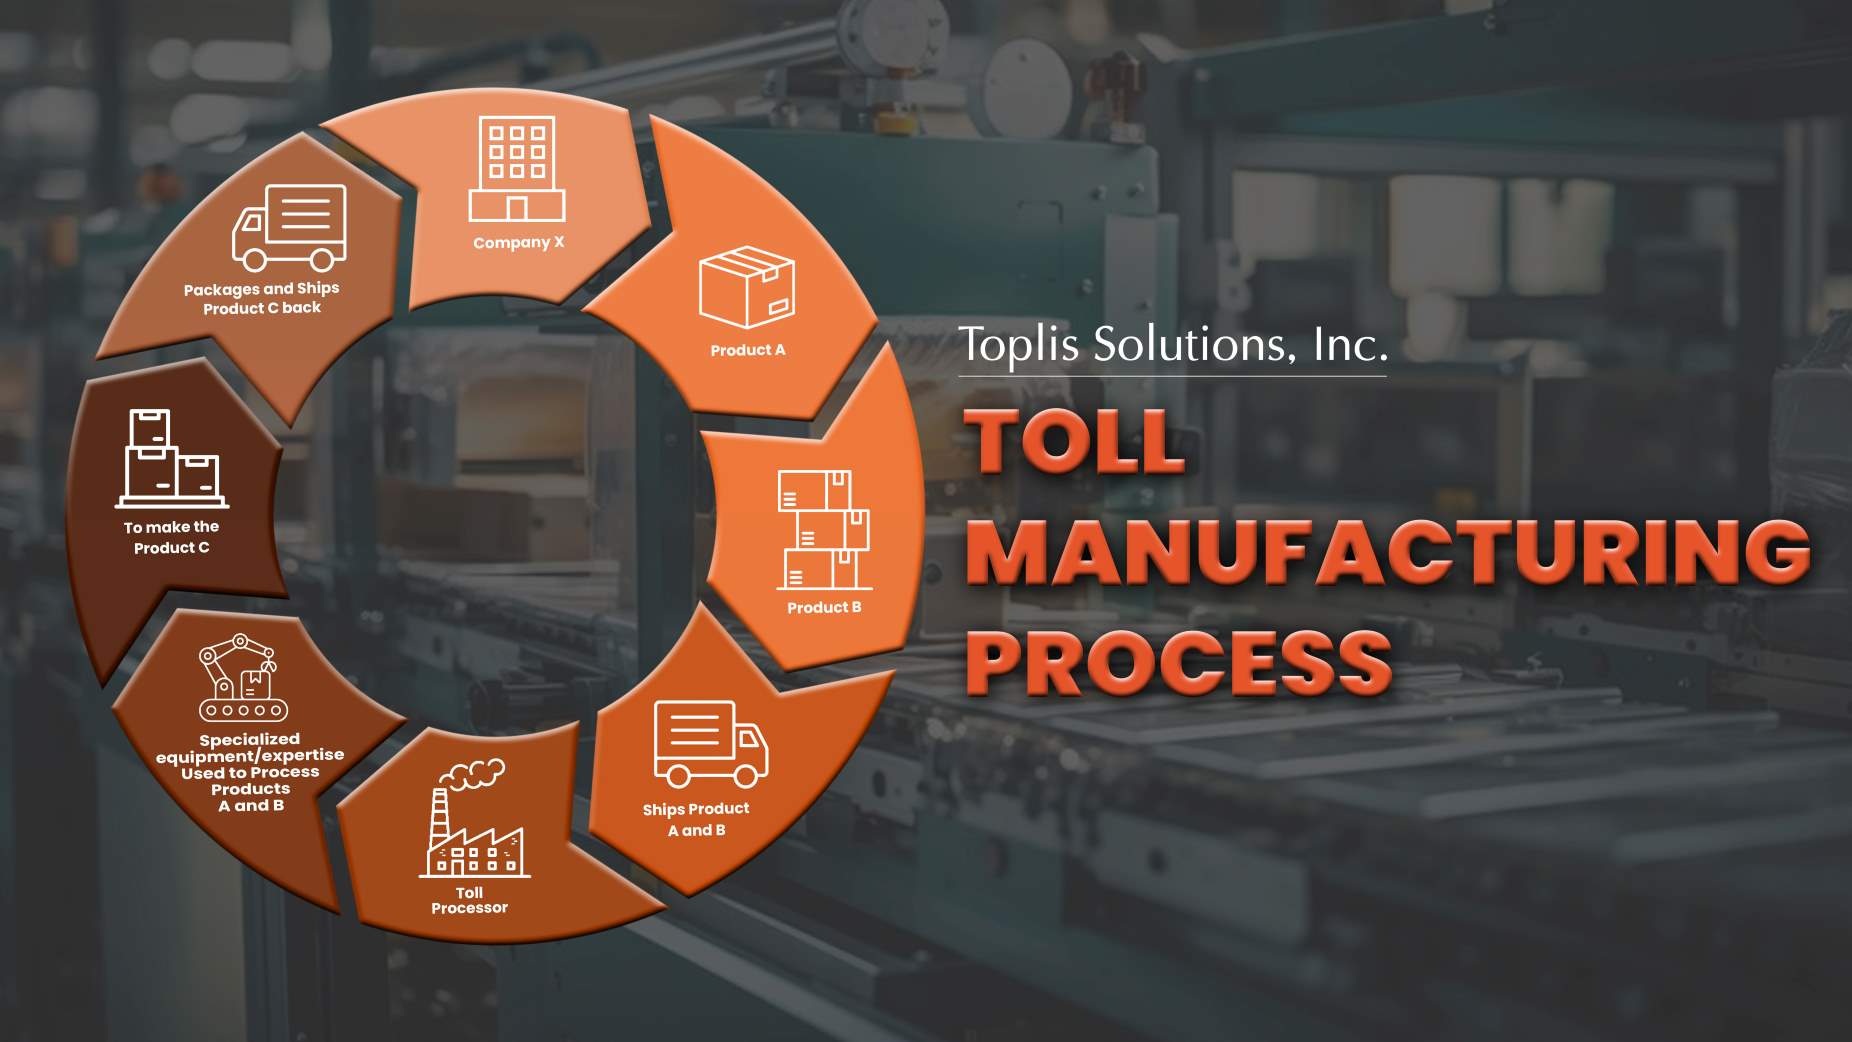 example of toll manufacturing process that service providers follow in providing services to their clients